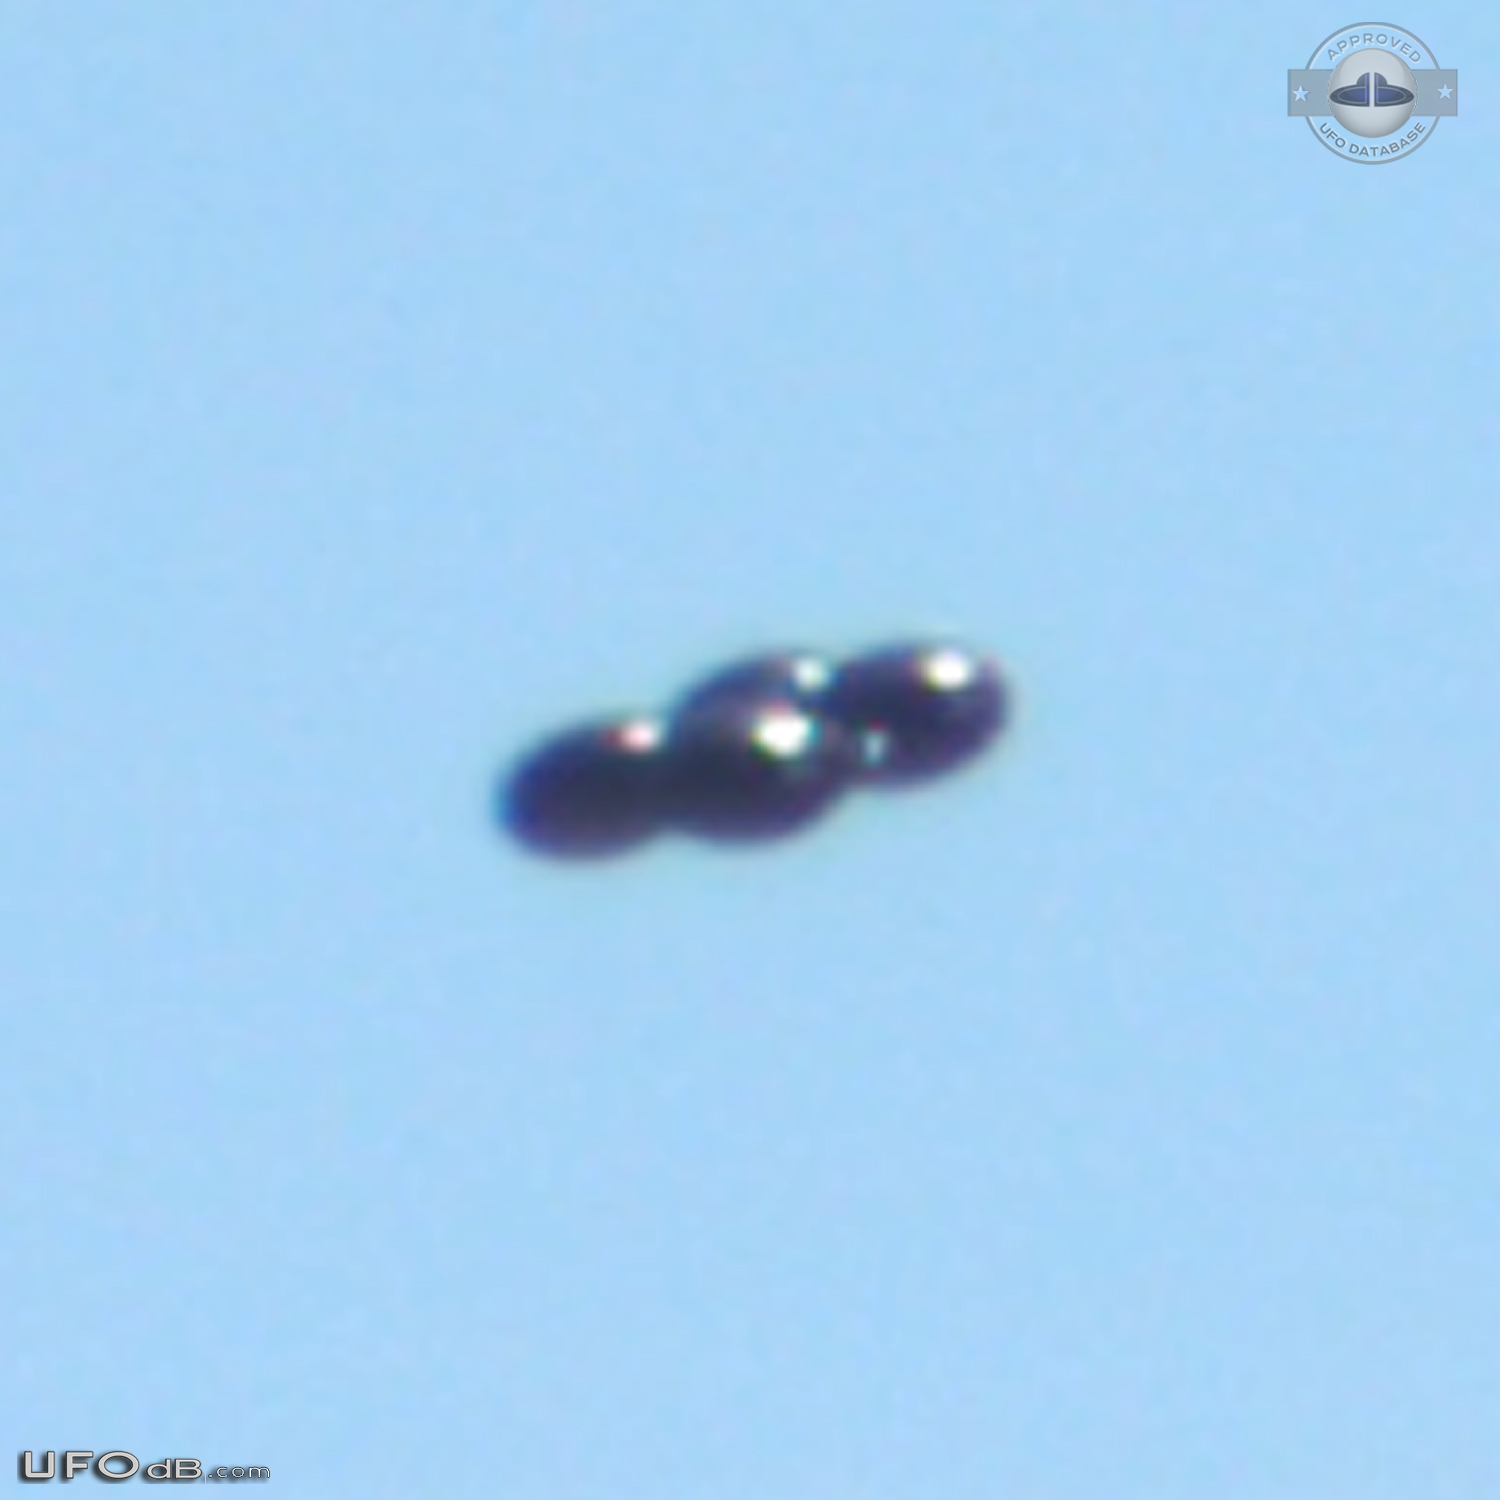 UFO with 4 Spheres over Austin Bergstrom Airport in Texas USA 2014 UFO Picture #670-7